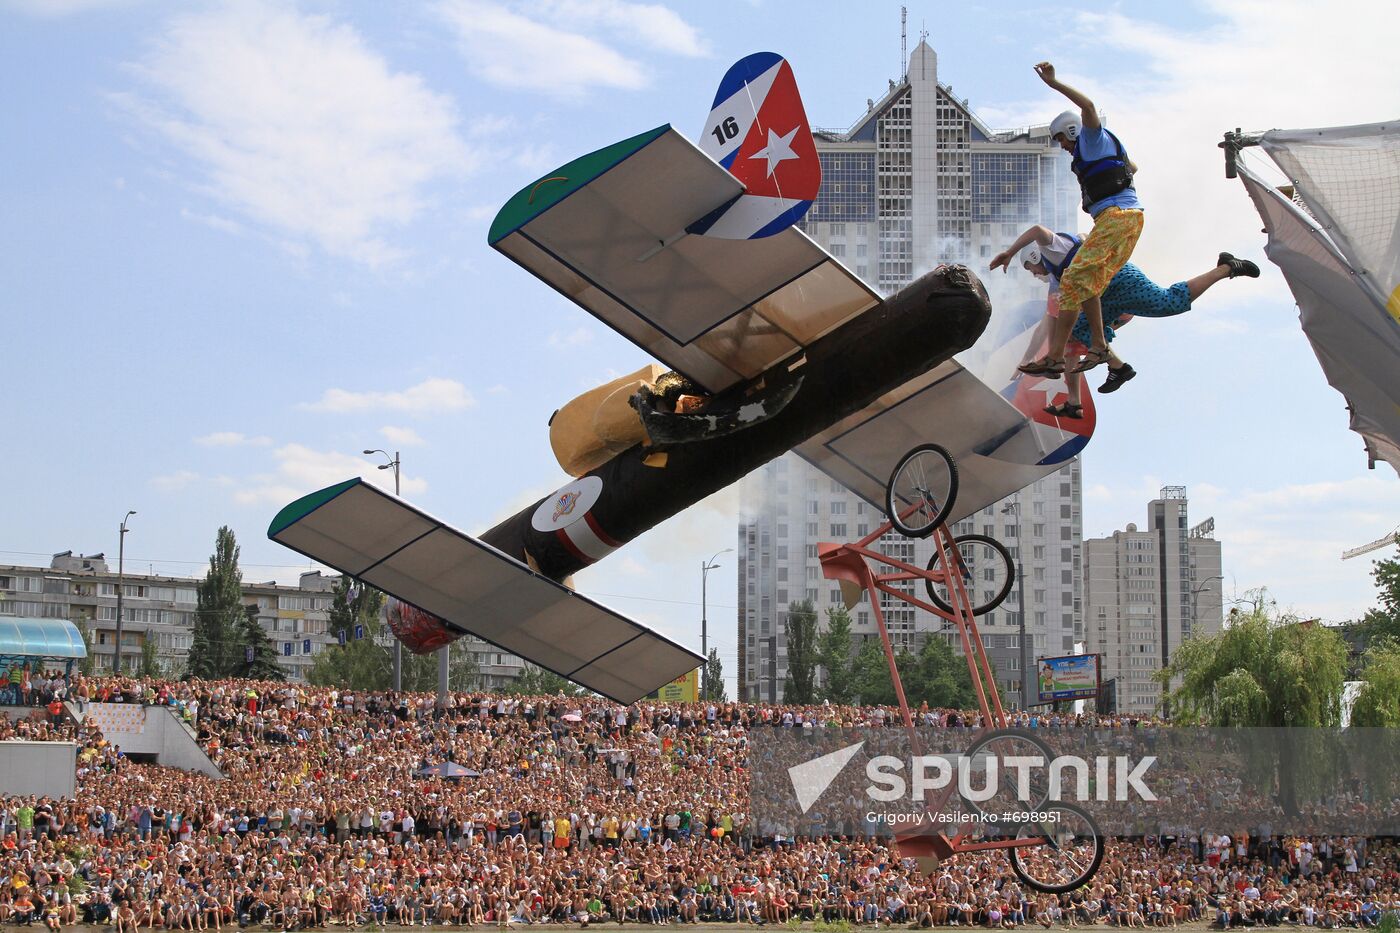 Red Bull Flugtag, creative aircraft contest